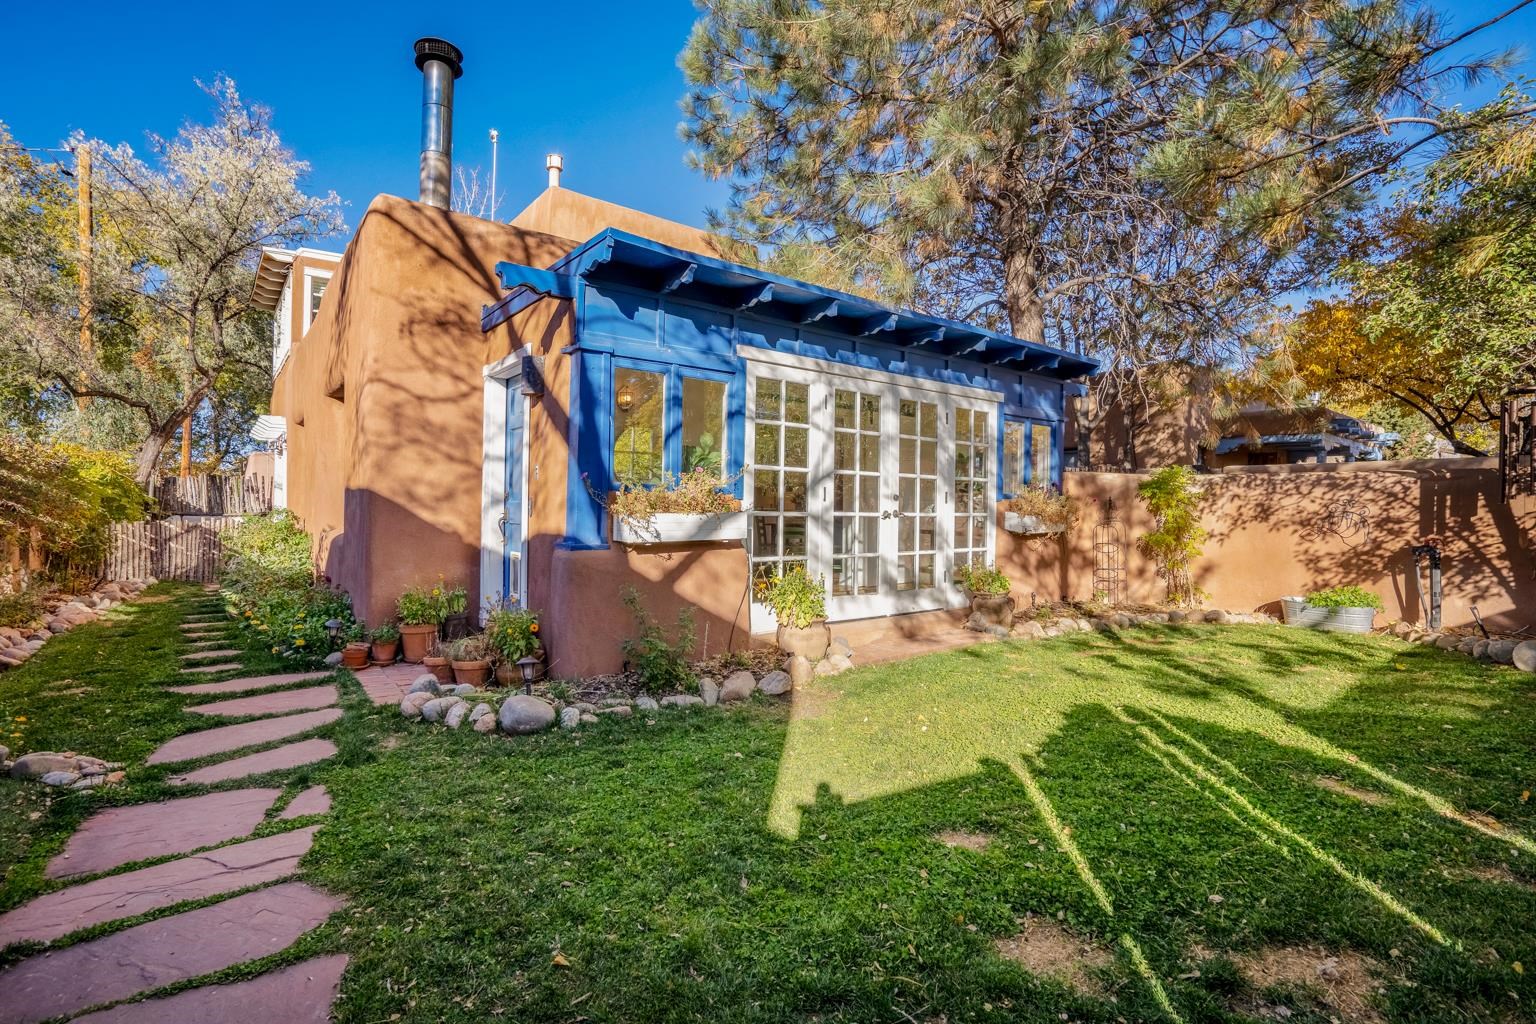 129 Berger, Santa Fe, New Mexico 87505, 2 Bedrooms Bedrooms, ,2 BathroomsBathrooms,Residential,For Sale,129 Berger,202104826